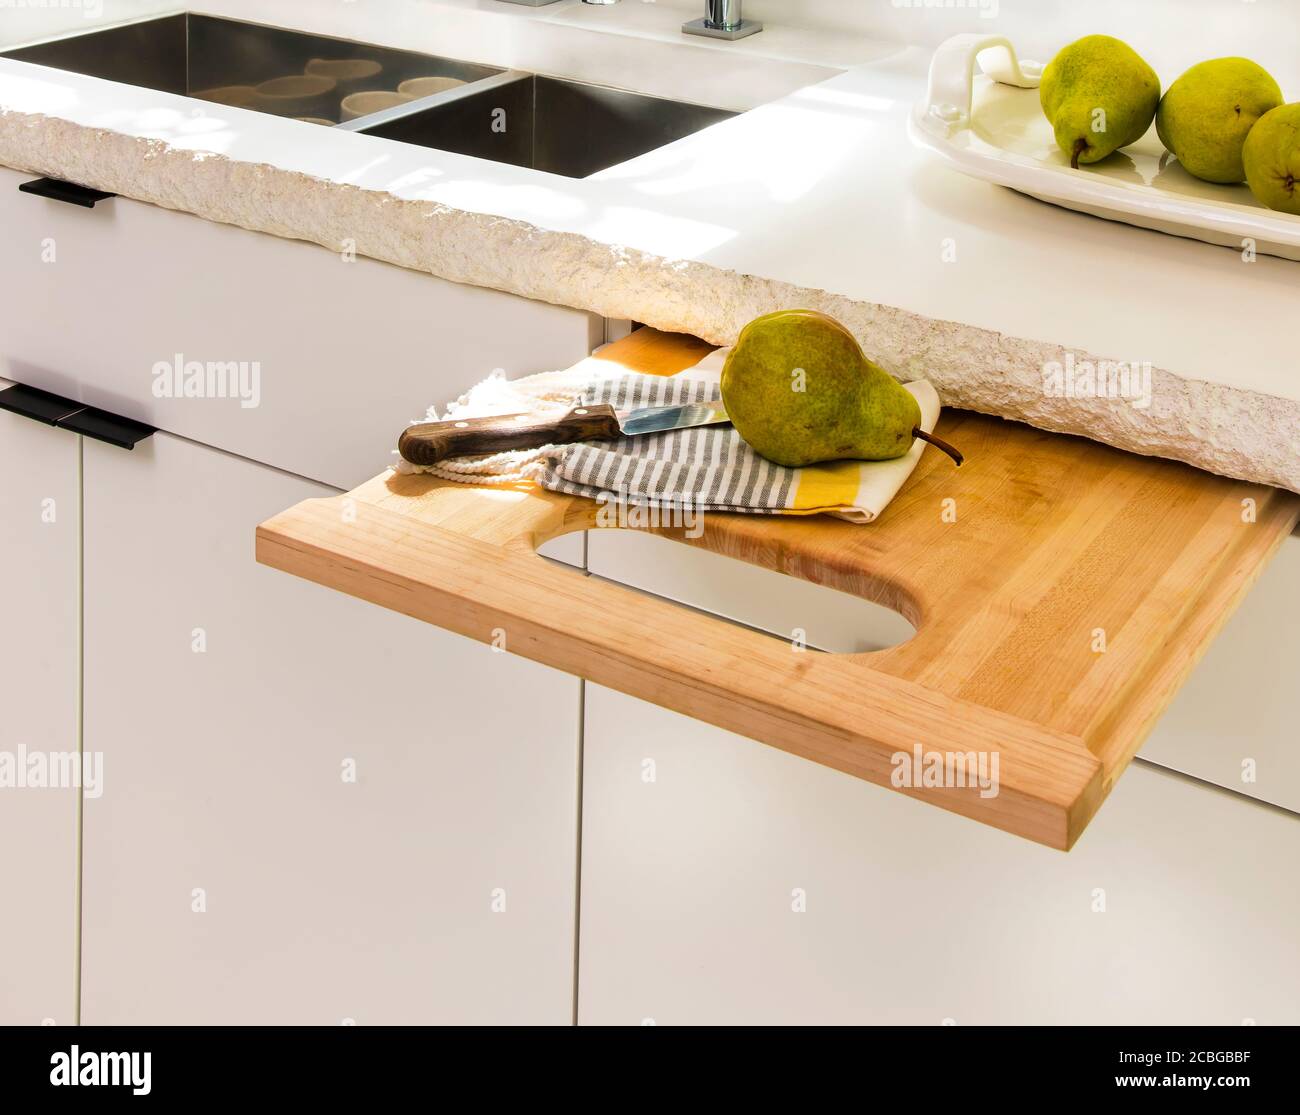 Contemporary White Kitchen with Concrete Countertop, Pull-Out Cutting Board  Stock Photo - Alamy